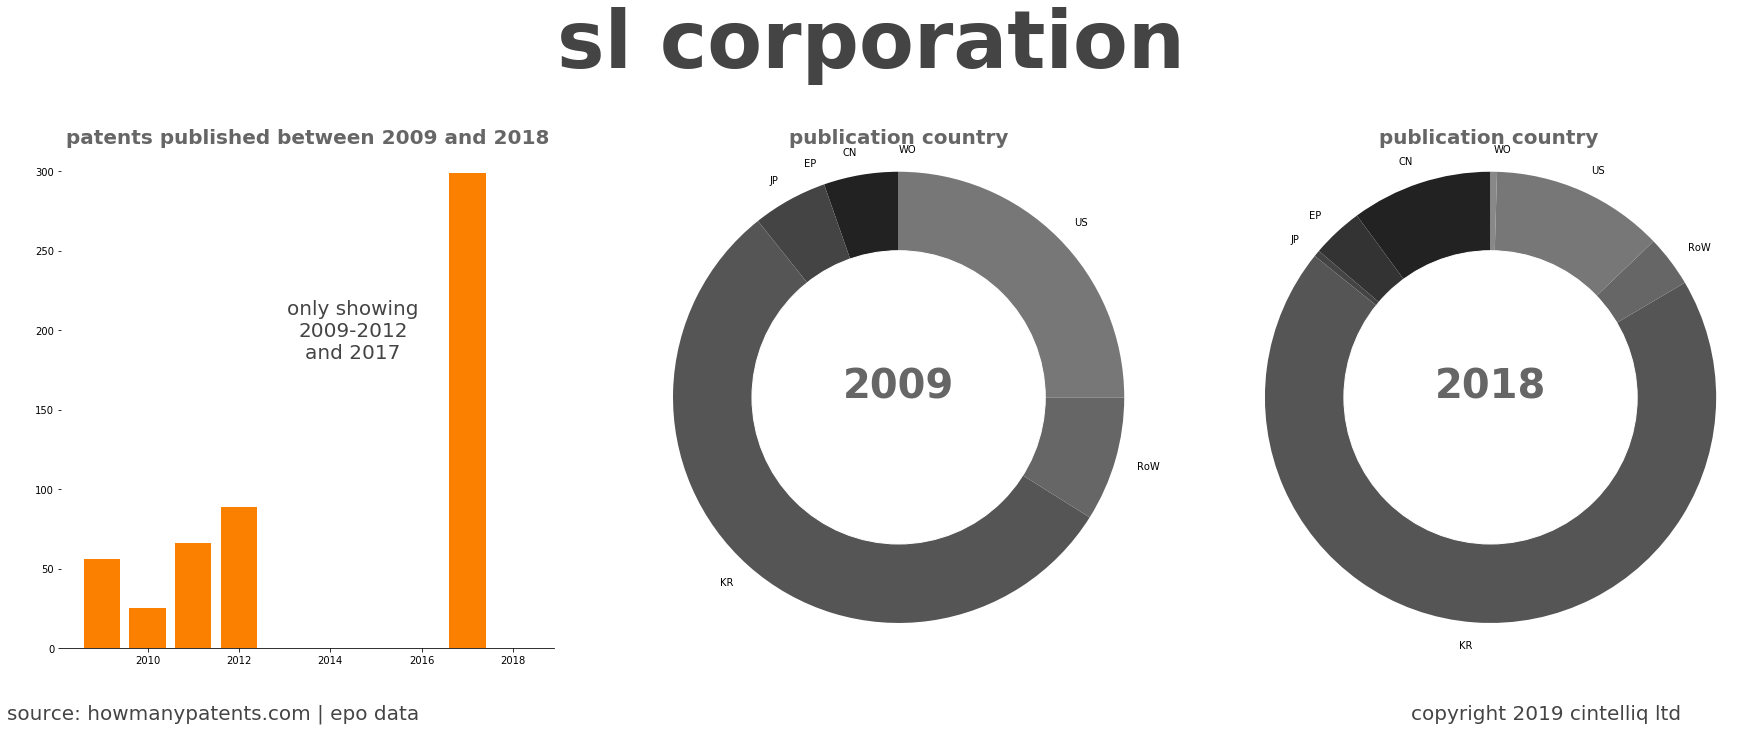 summary of patents for Sl Corporation